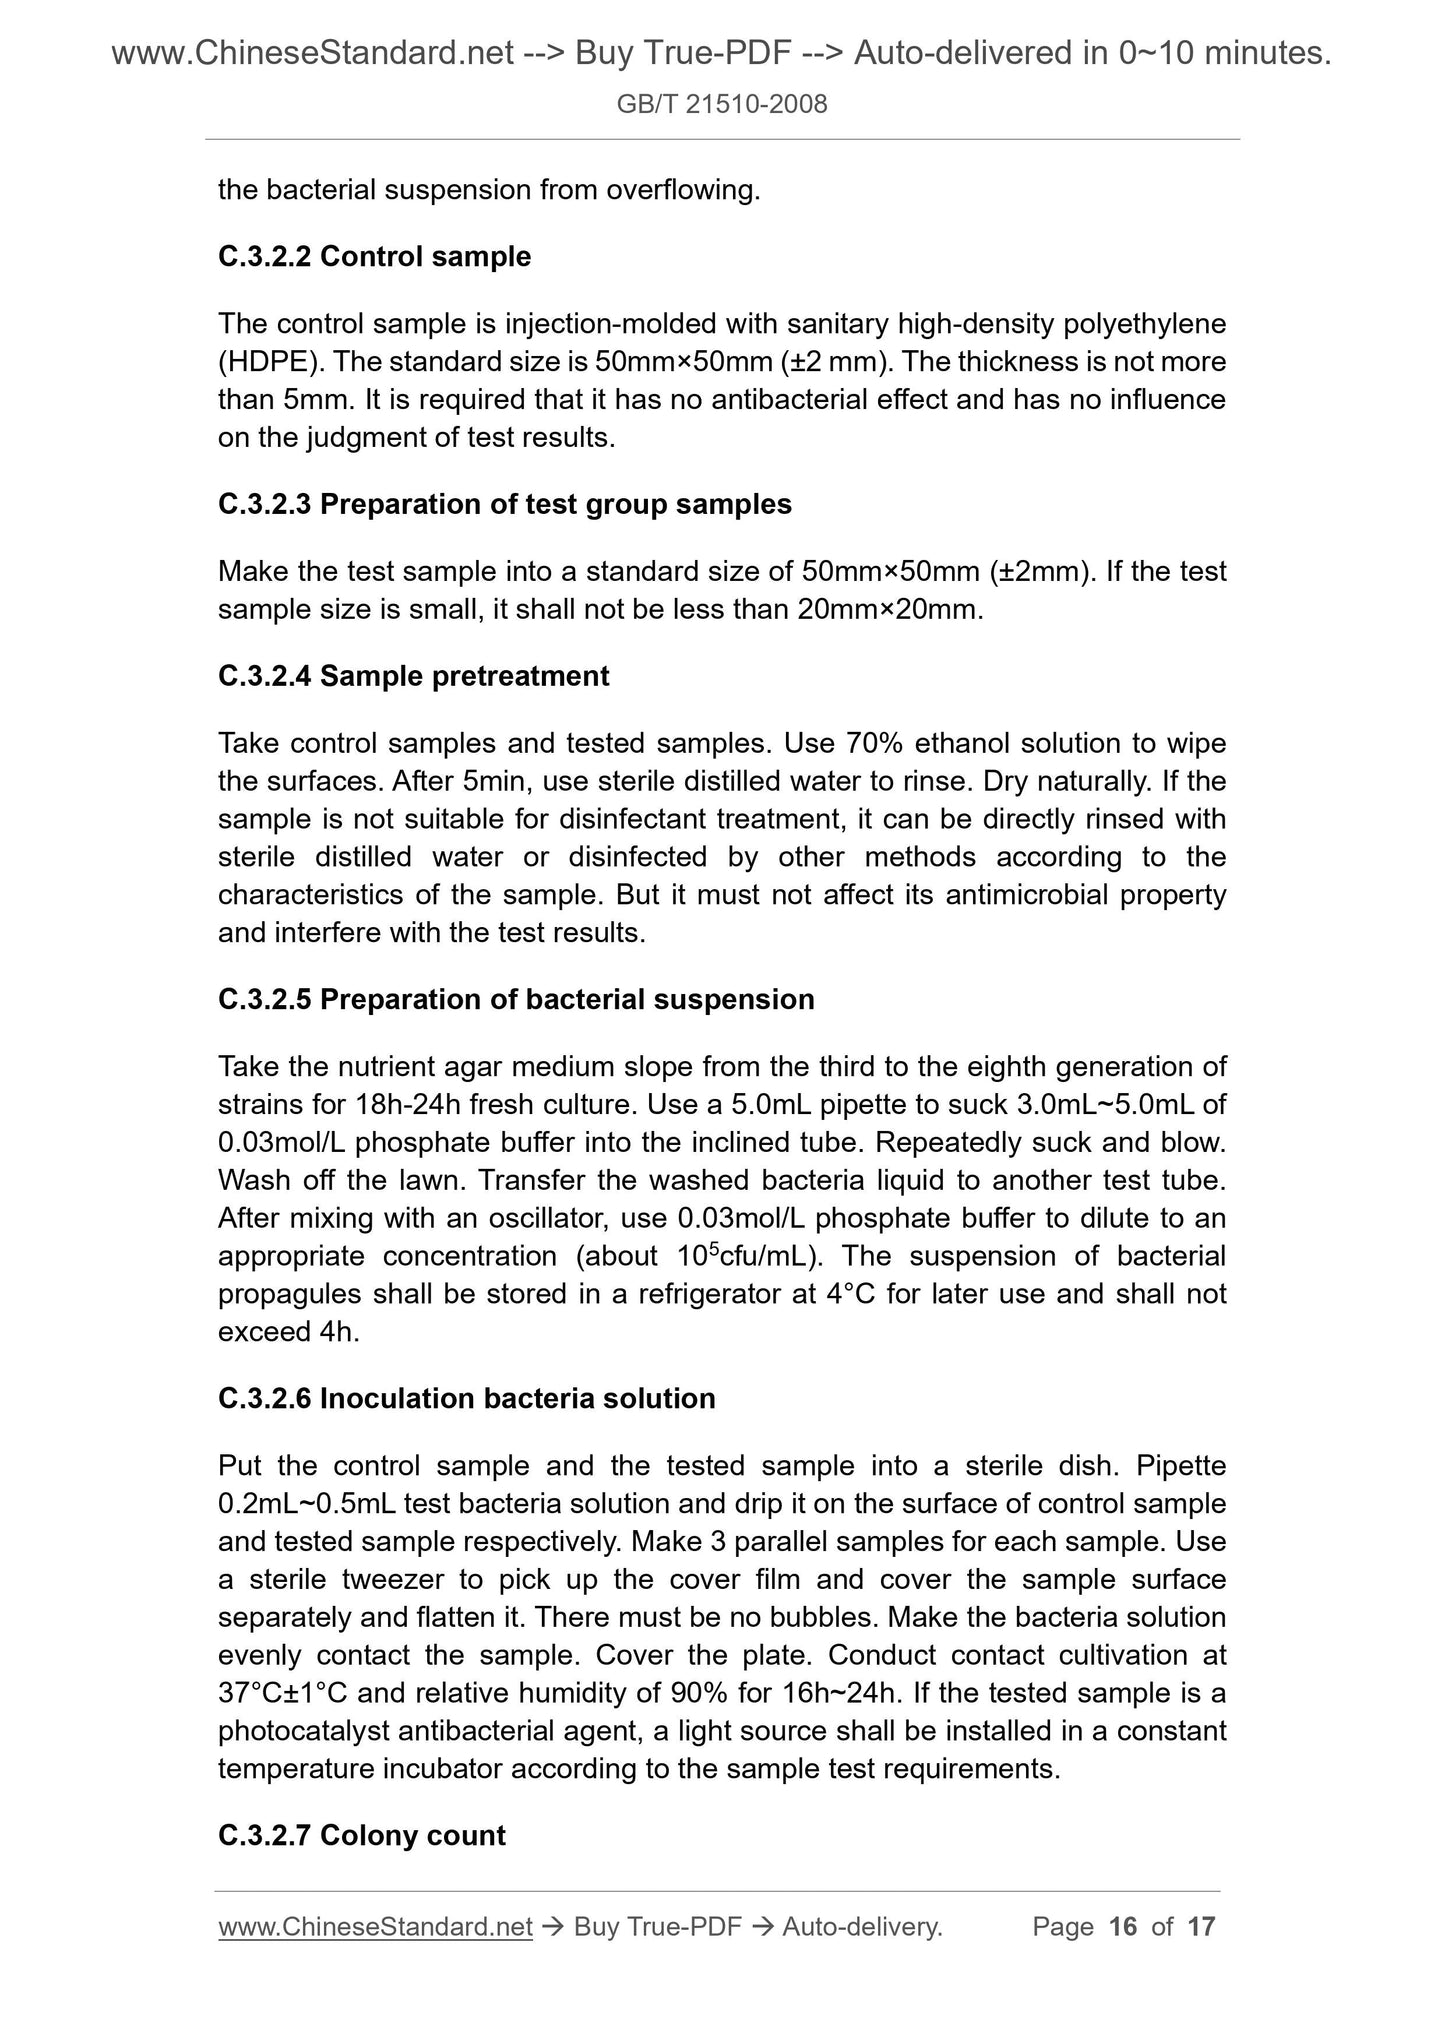 GB/T 21510-2008 Page 8